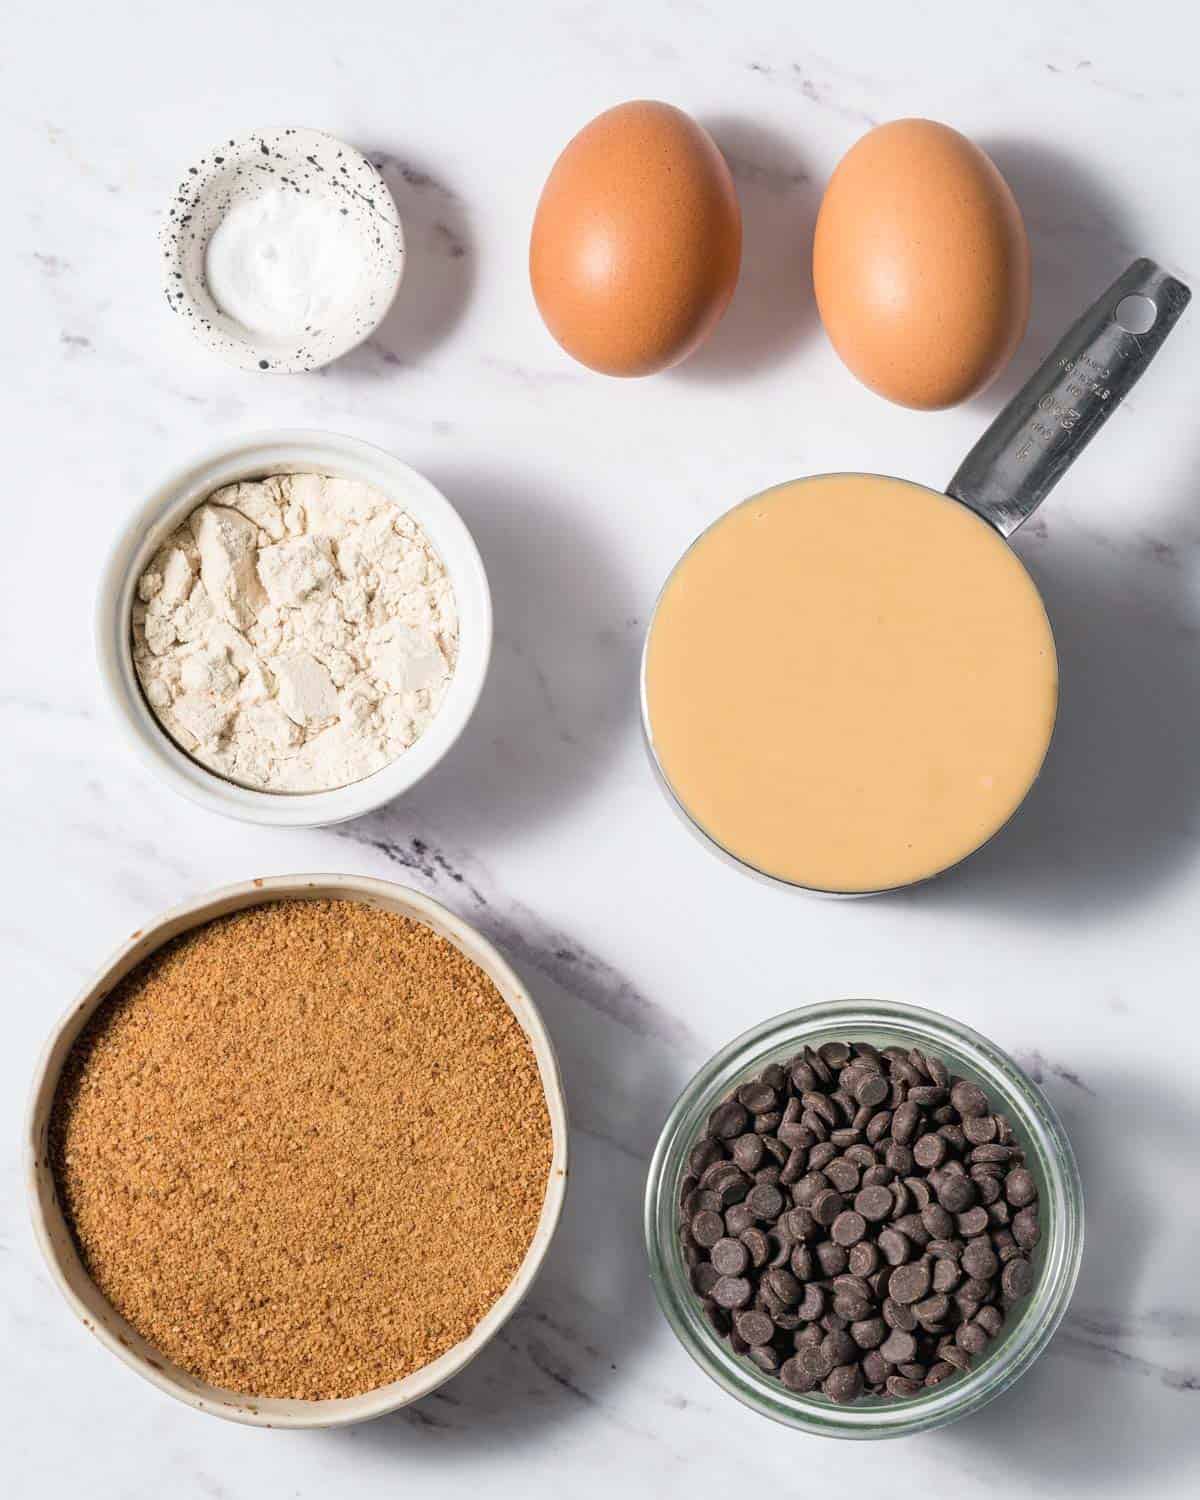 ingredients to make peanut butter cookies: 2 eggs, protein powder, coconut sugar, chocolate chips, peanut butter, and baking soda.